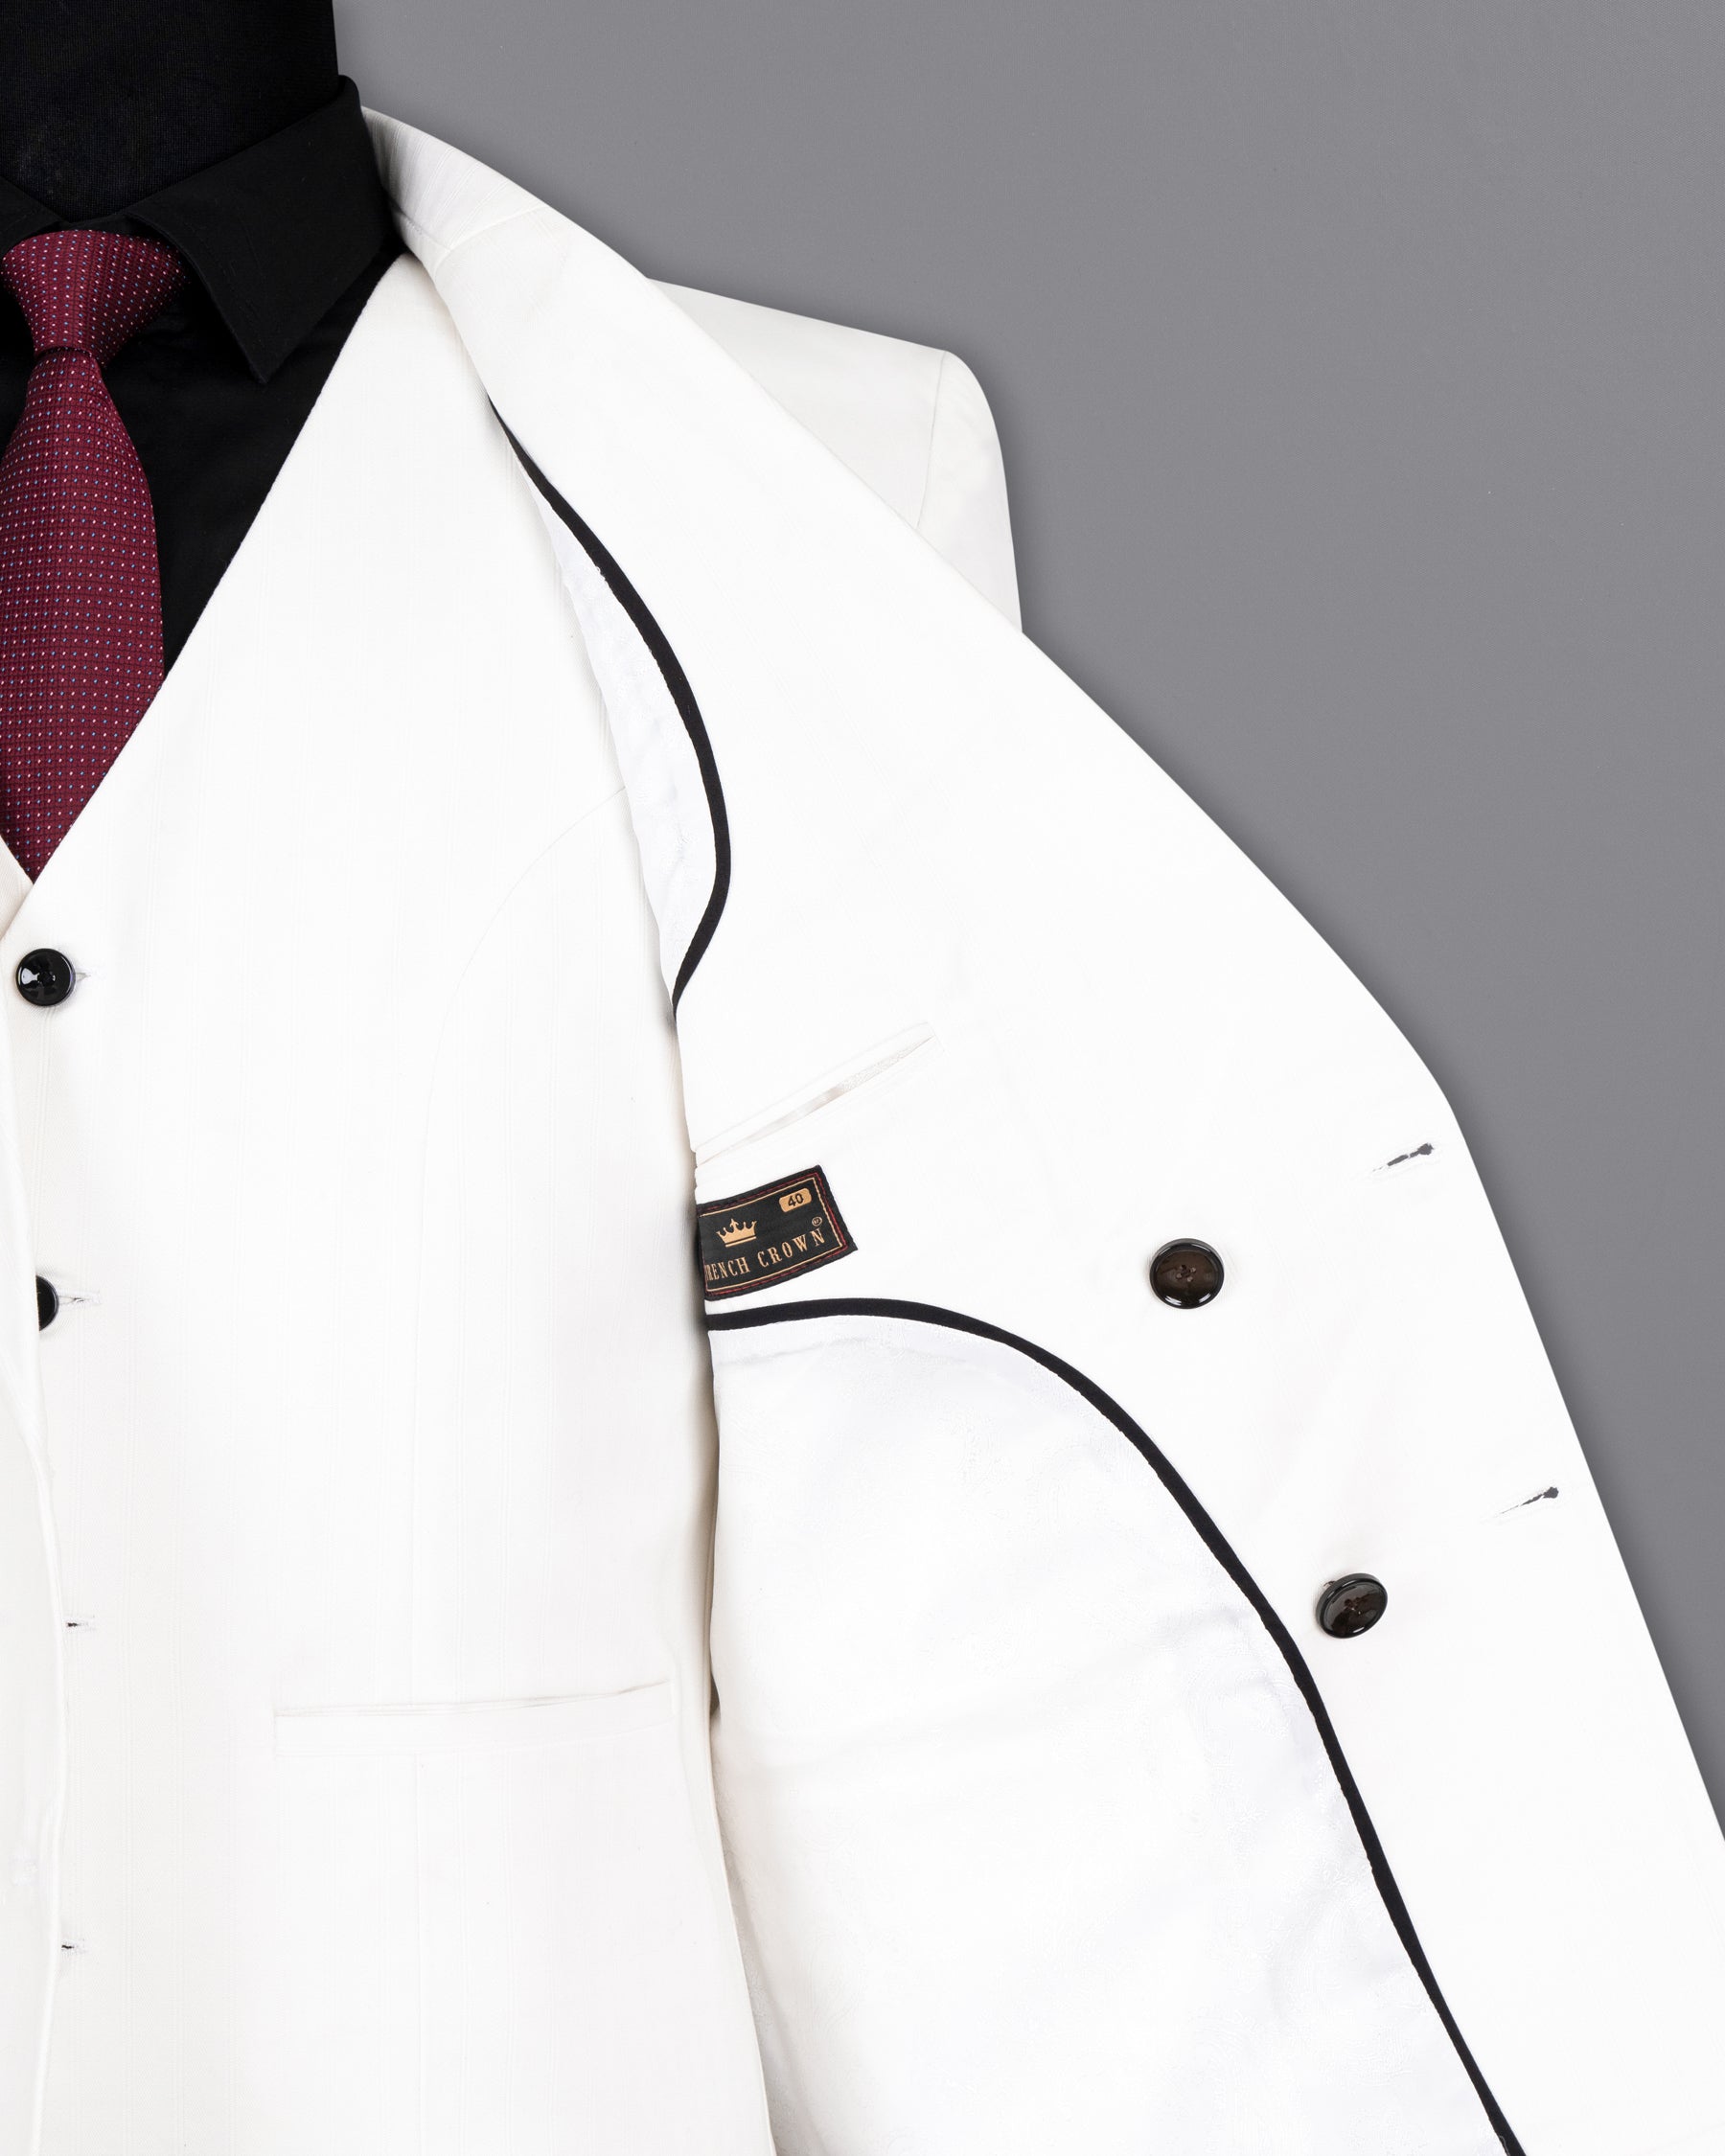 Bright White Subtle Striped  Double Breasted Premium Cotton Blazer BL1395-DB-36, BL1395-DB-38, BL1395-DB-40, BL1395-DB-42, BL1395-DB-44, BL1395-DB-46, BL1395-DB-48, BL1395-DB-50, BL1395-DB-52, BL1395-DB-54, BL1395-DB-56, BL1395-DB-58, BL1395-DB-60